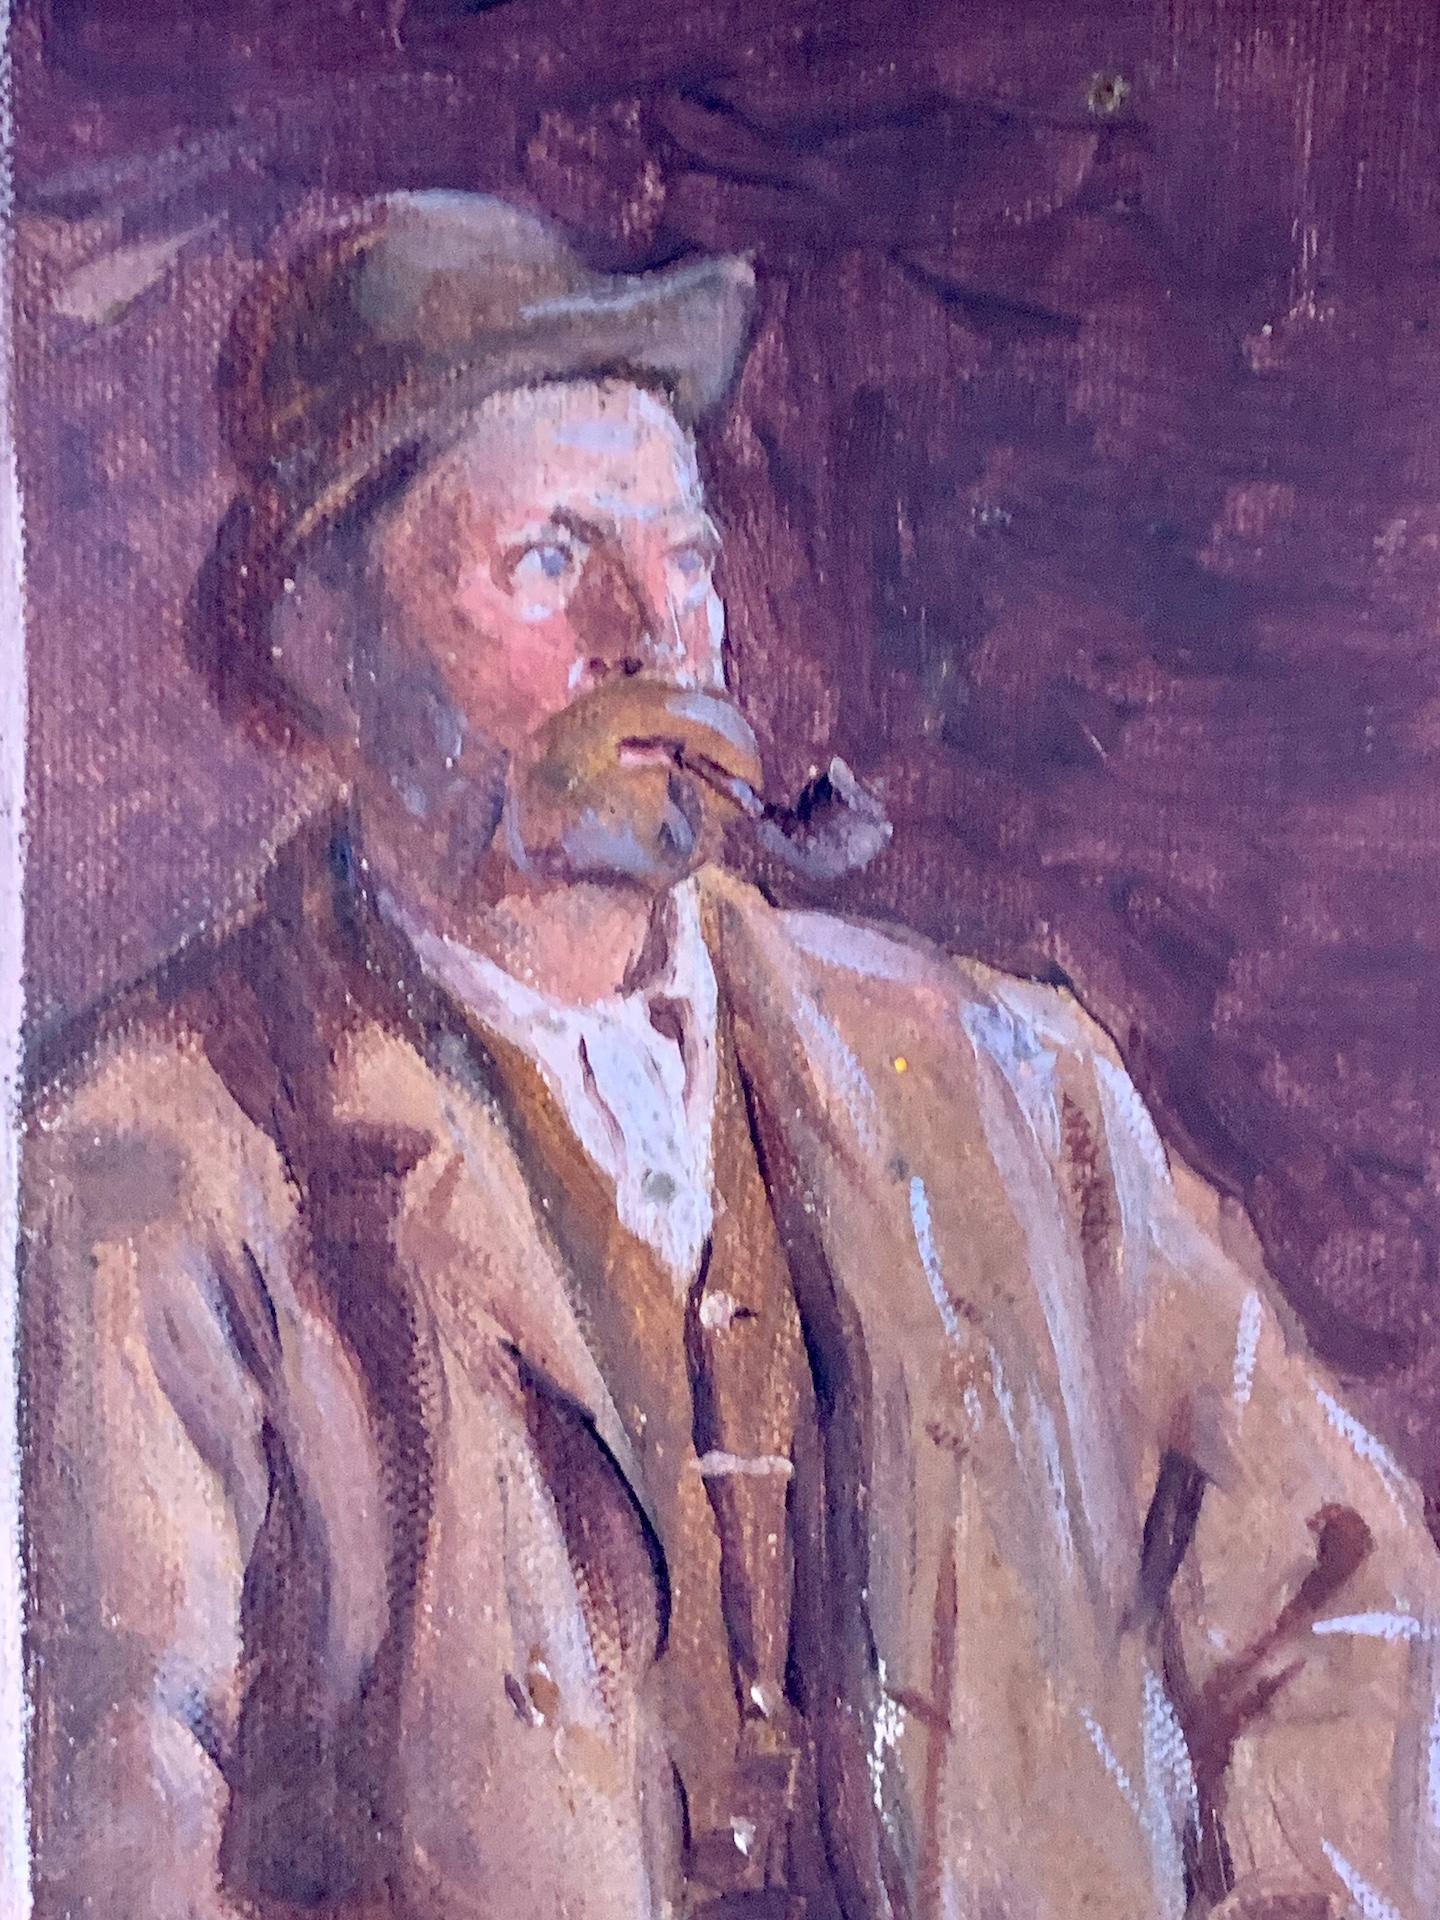 19th century Irish portrait of a man, smoking a Pipe, seated in a barn interior. - Victorian Painting by Irish School